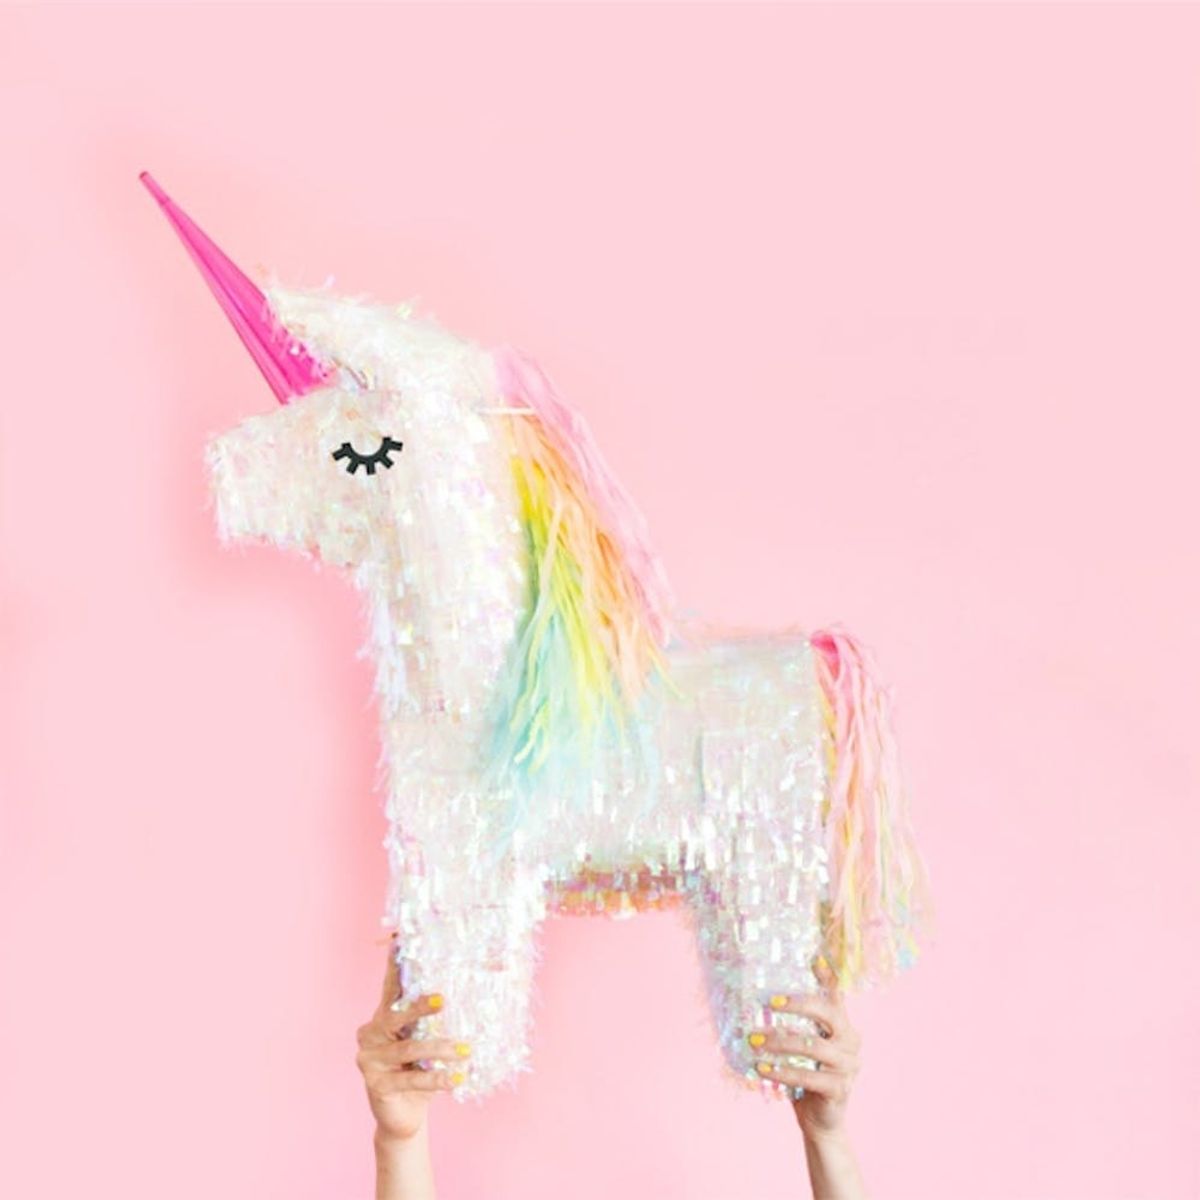 16 Magical Reasons Why You Should Throw a Unicorn Party